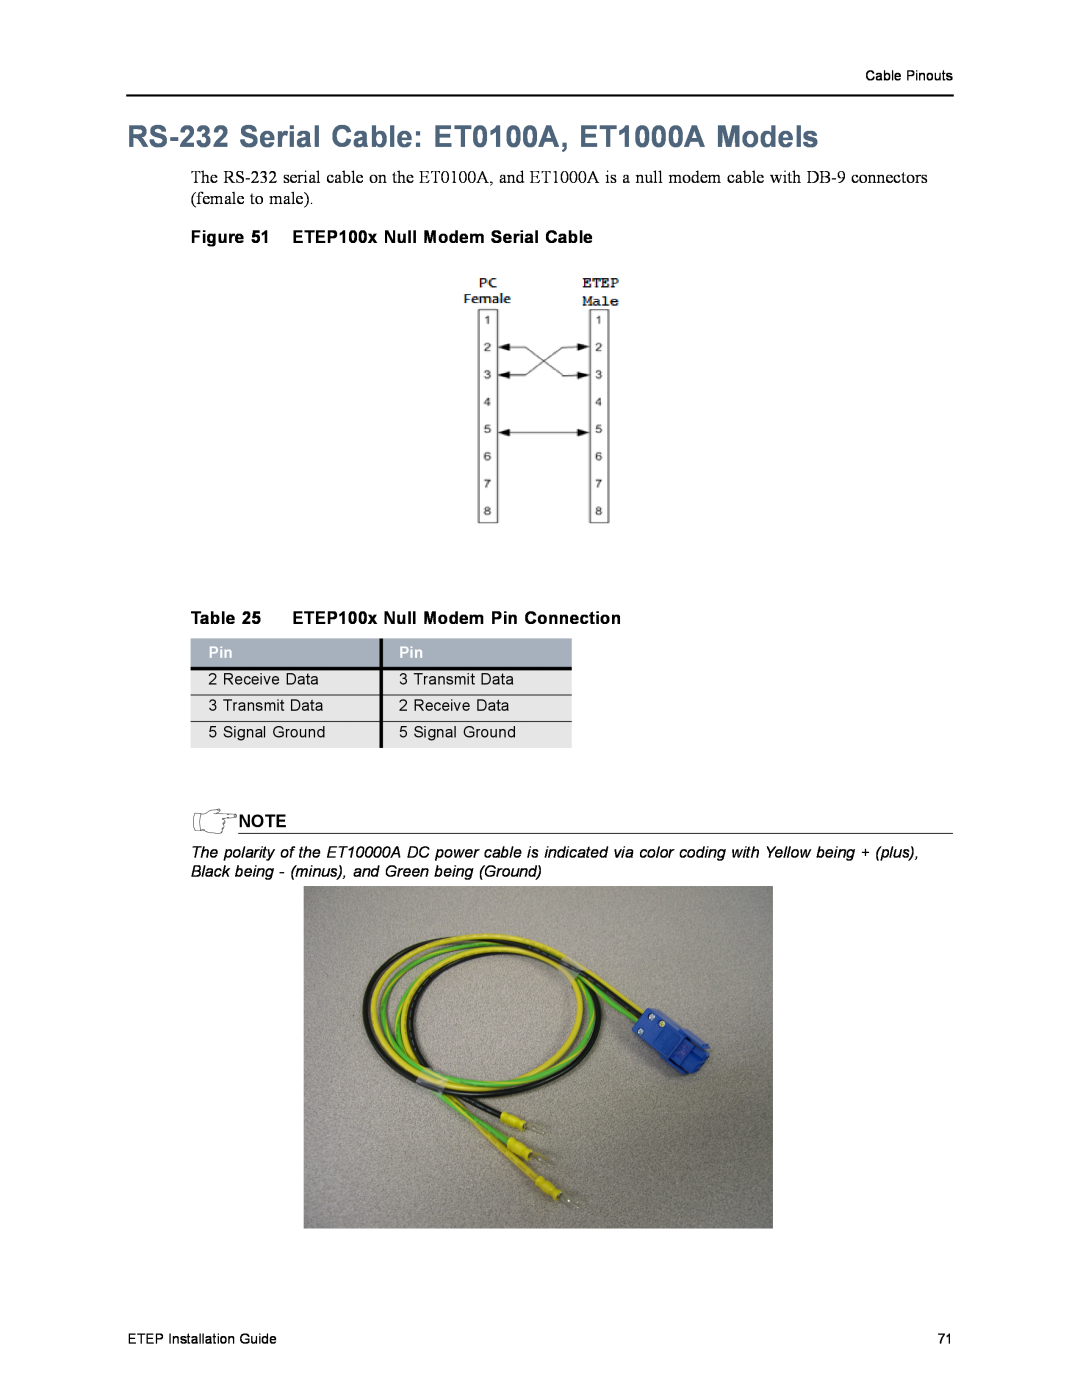 Black Box ET0010A, ET10000A RS-232 Serial Cable ET0100A, ET1000A Models, ETEP100x Null Modem Serial Cable, Cable Pinouts 